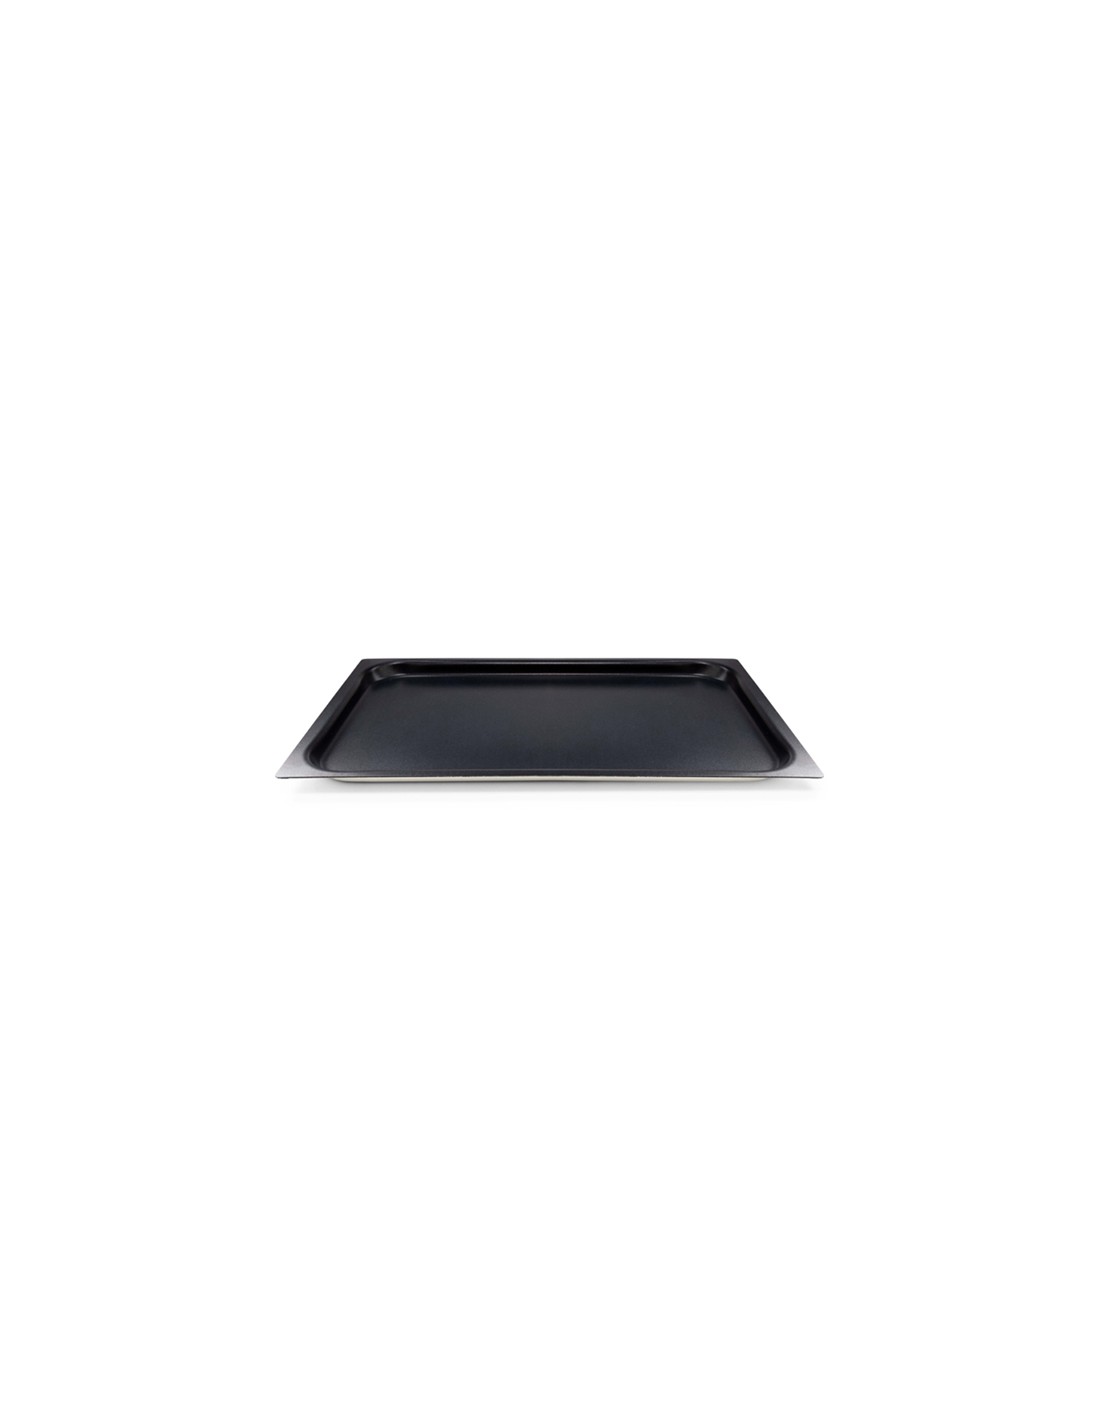 Special non-stick baking tray - Simula different types of cooking - Dimensions GN 1/1 (53x32.5 cm)